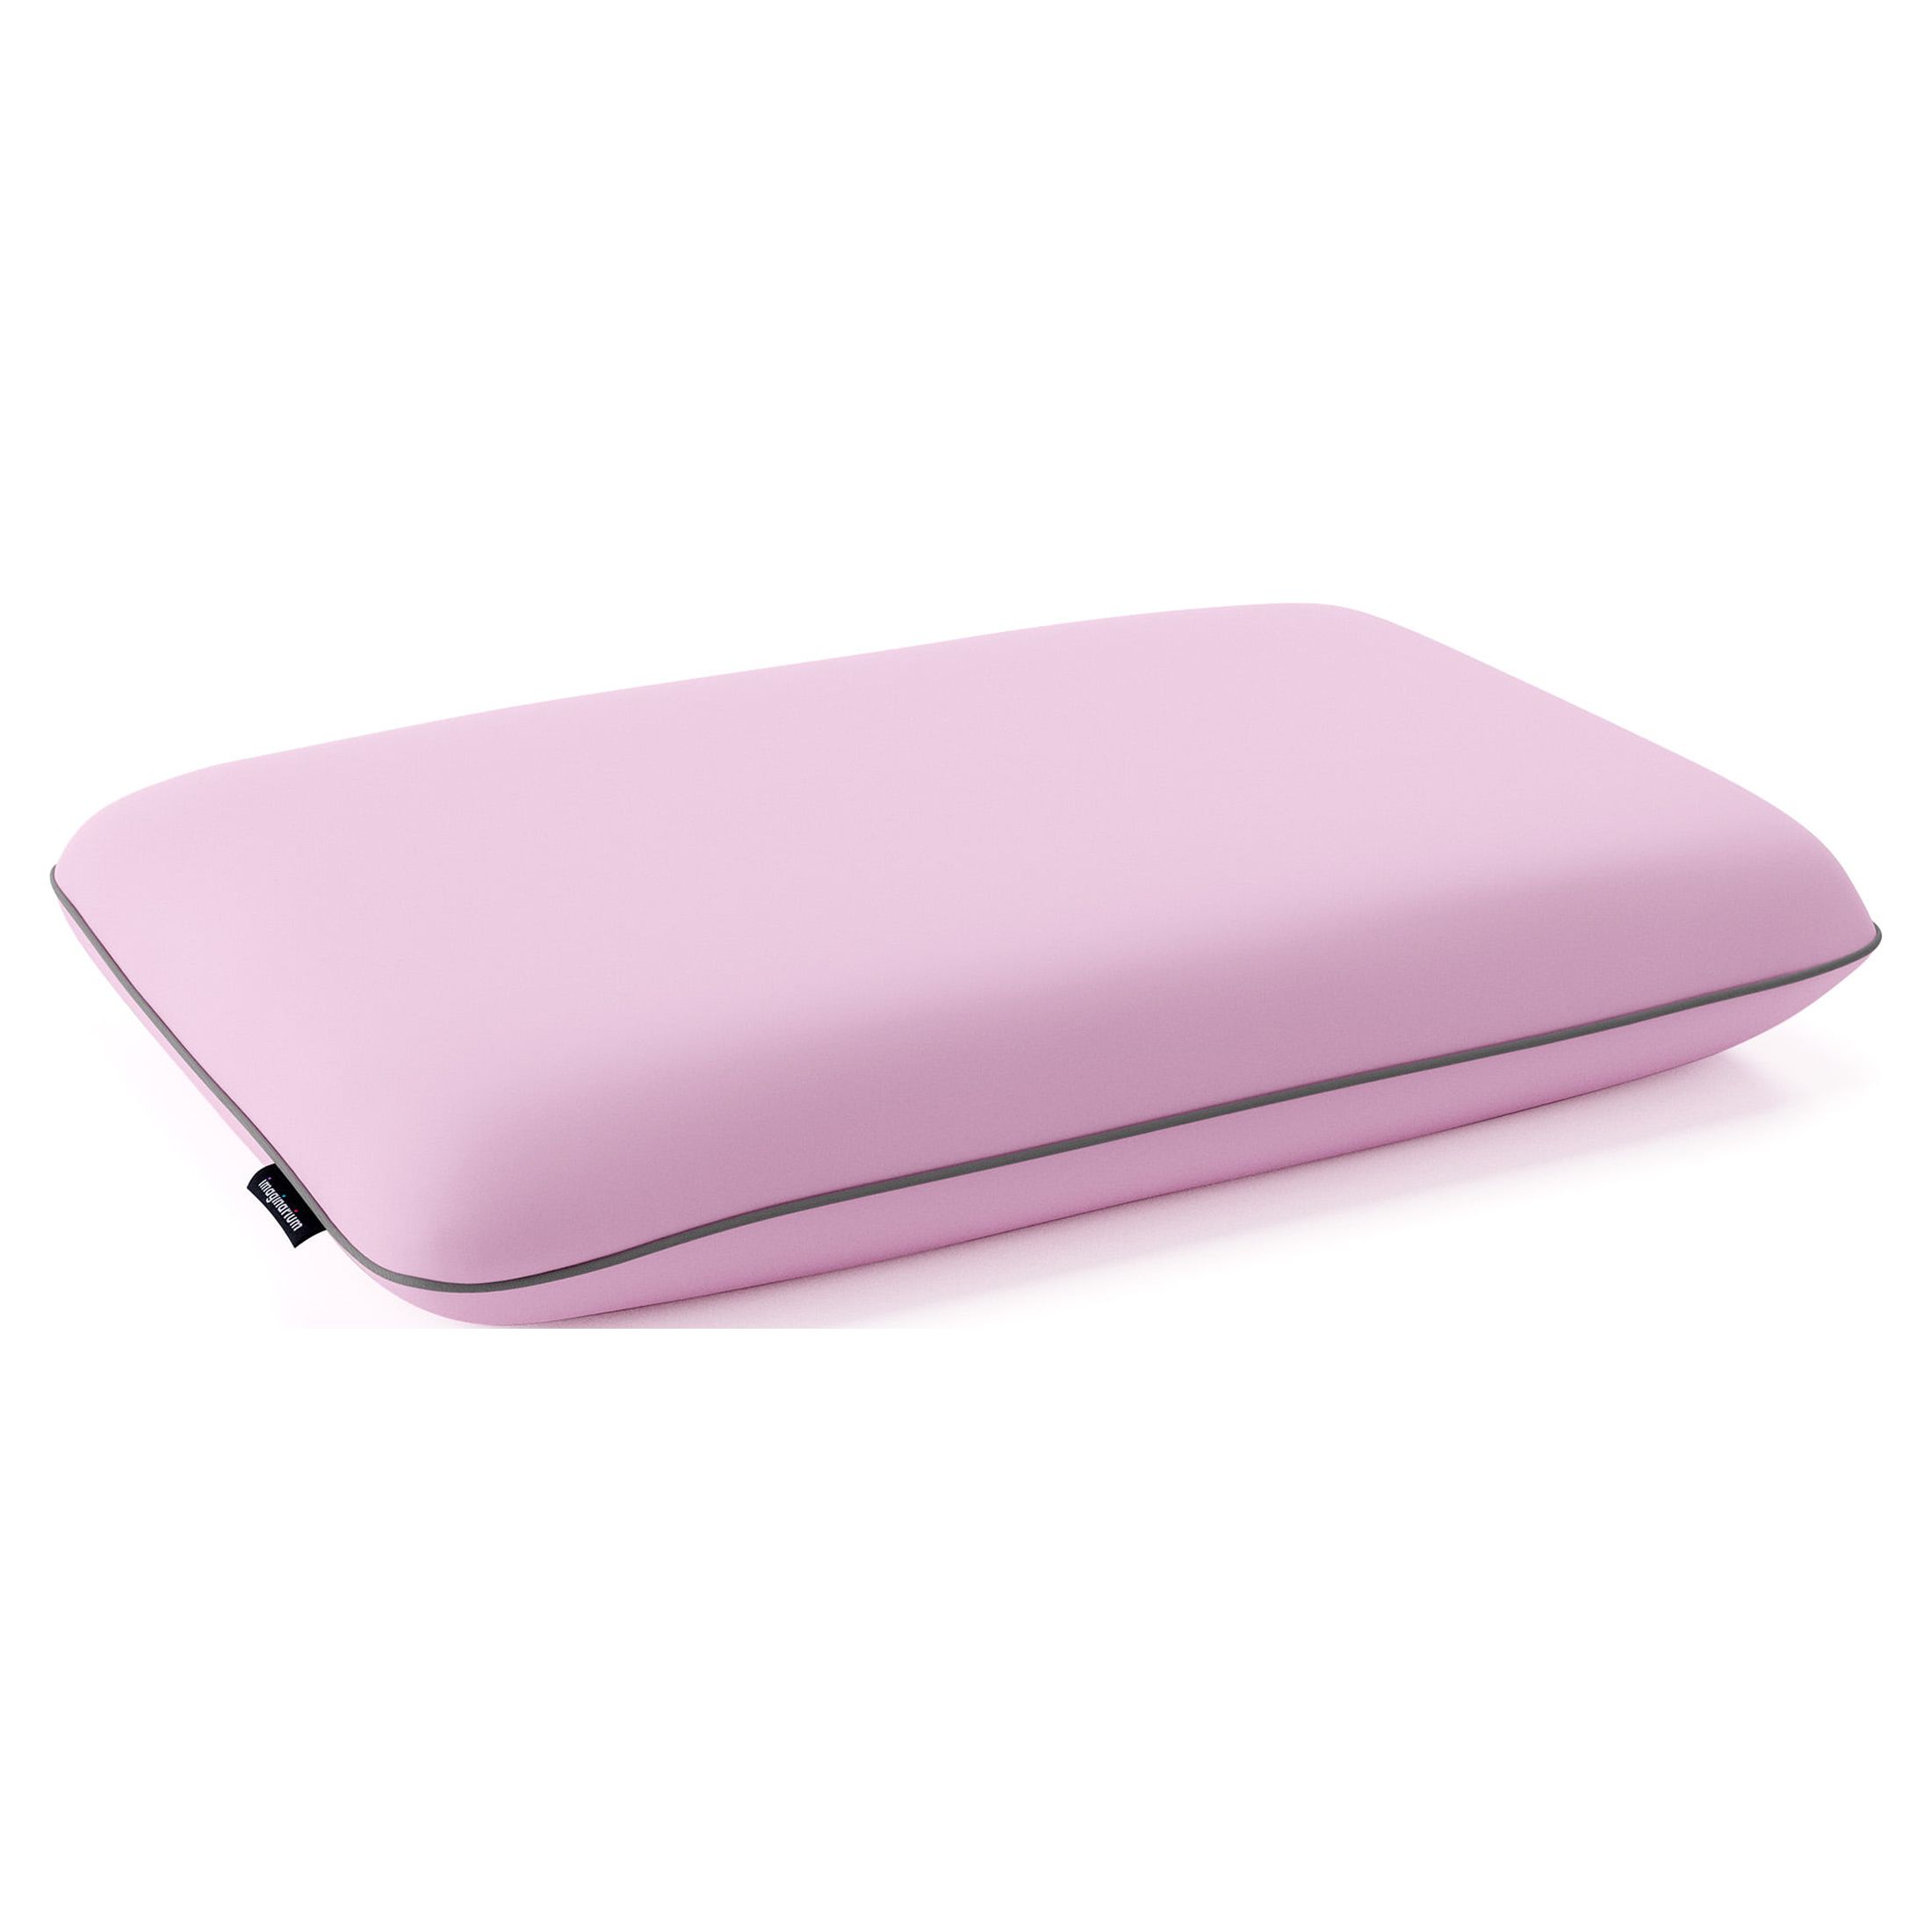 Memory Foam Fun Pillow With Cool-to-the-Touch Cover, Standard/Queen, Pale Pink, 1 Pack - image 4 of 7